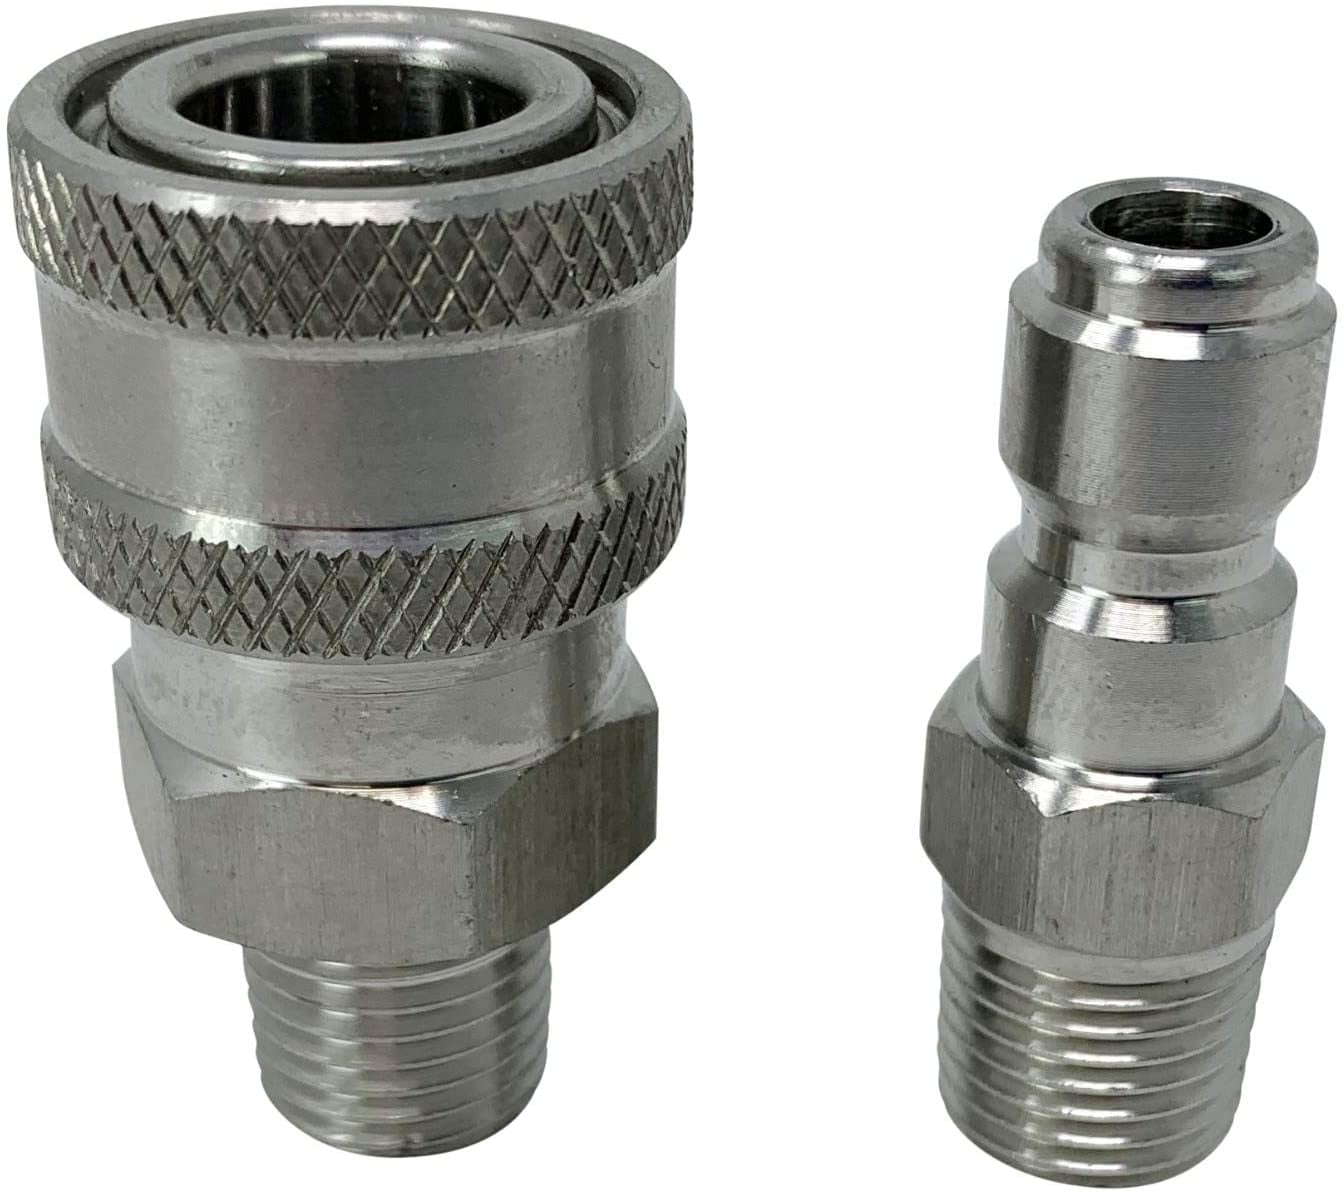 Stens 758-910 Quick Coupler Socket 1/4 Inch Male Brass Max PSI 4000 for sale online 